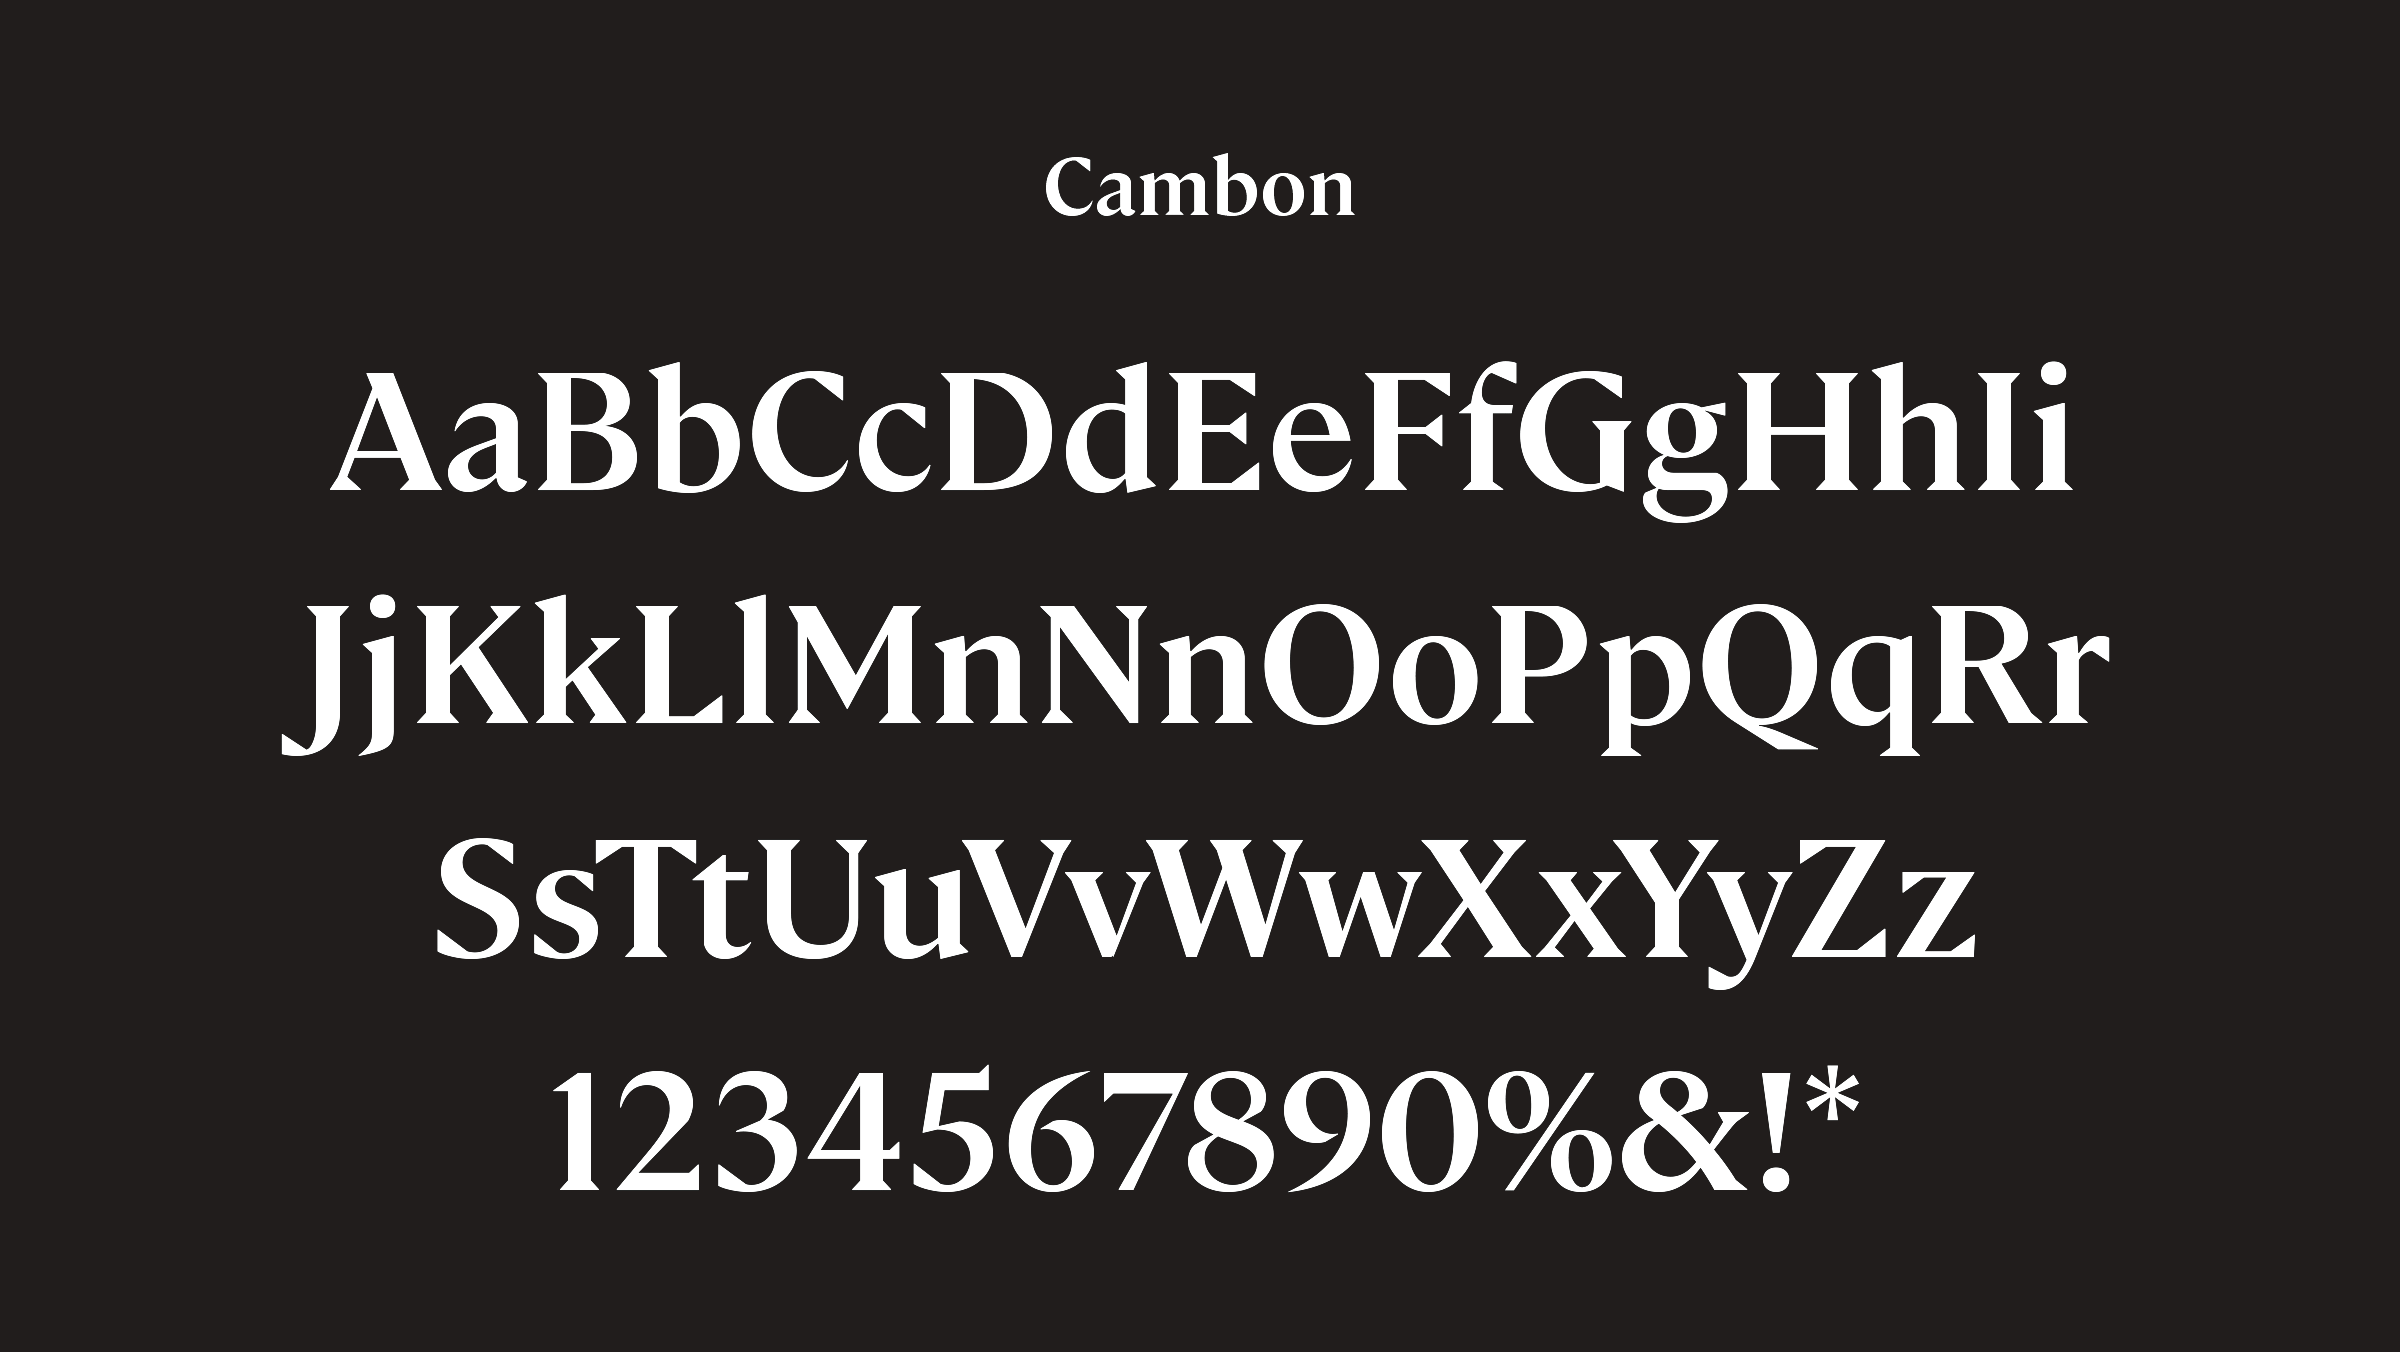 WP1-Font-Cambon-Recovered